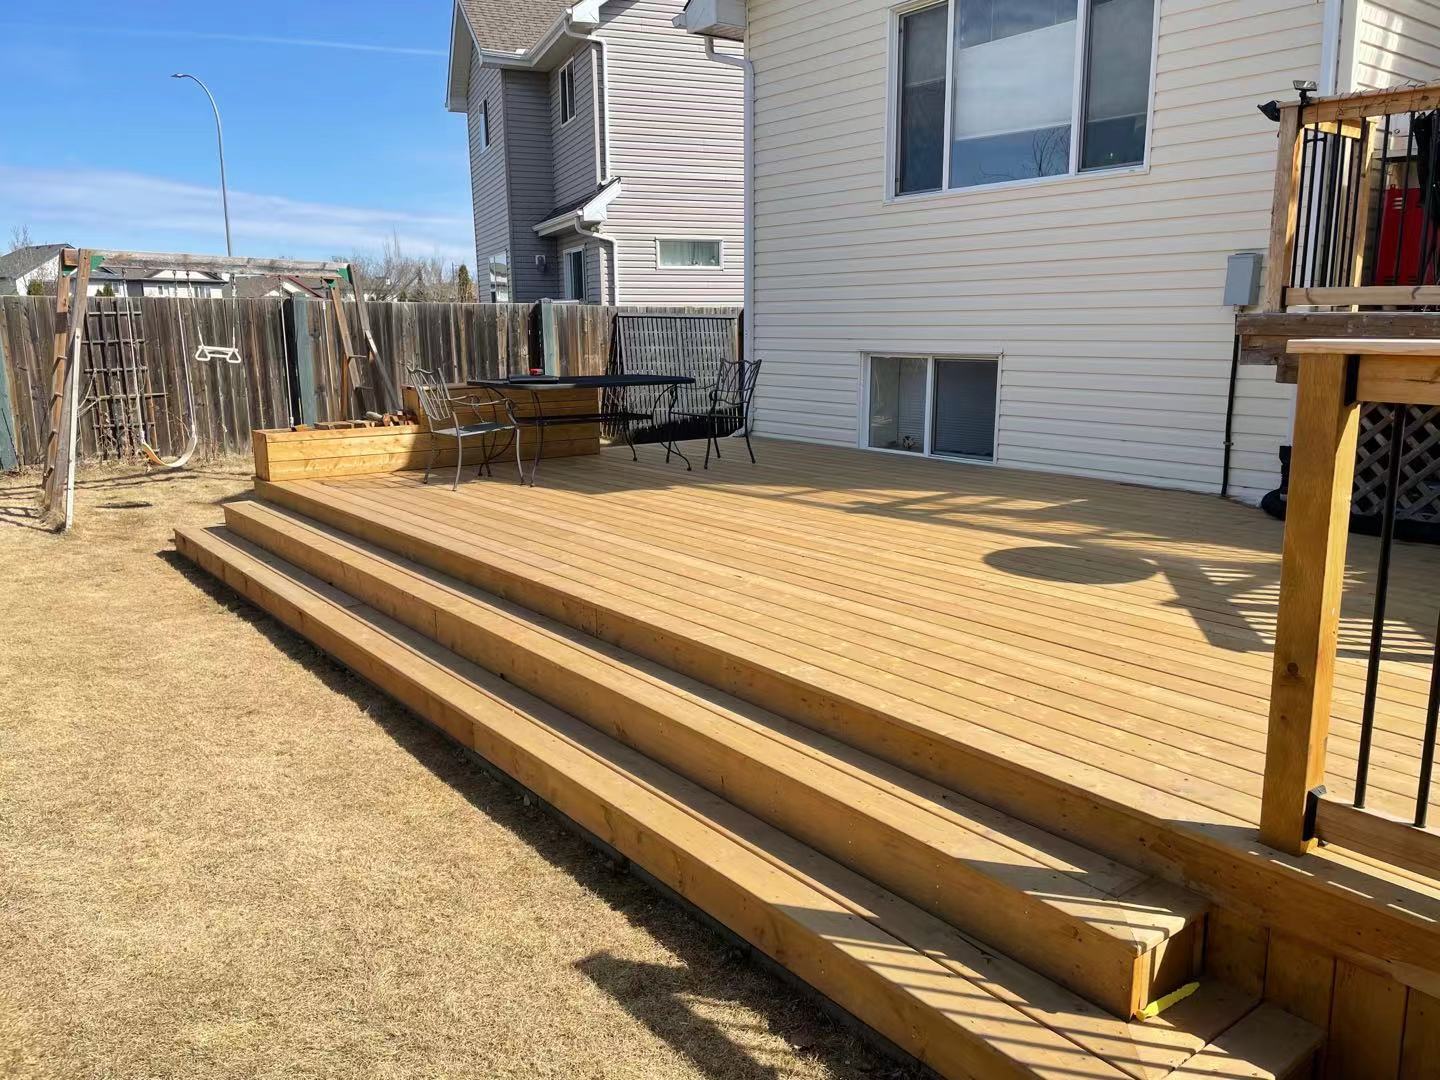 a newly constructed wood deck in the backyard